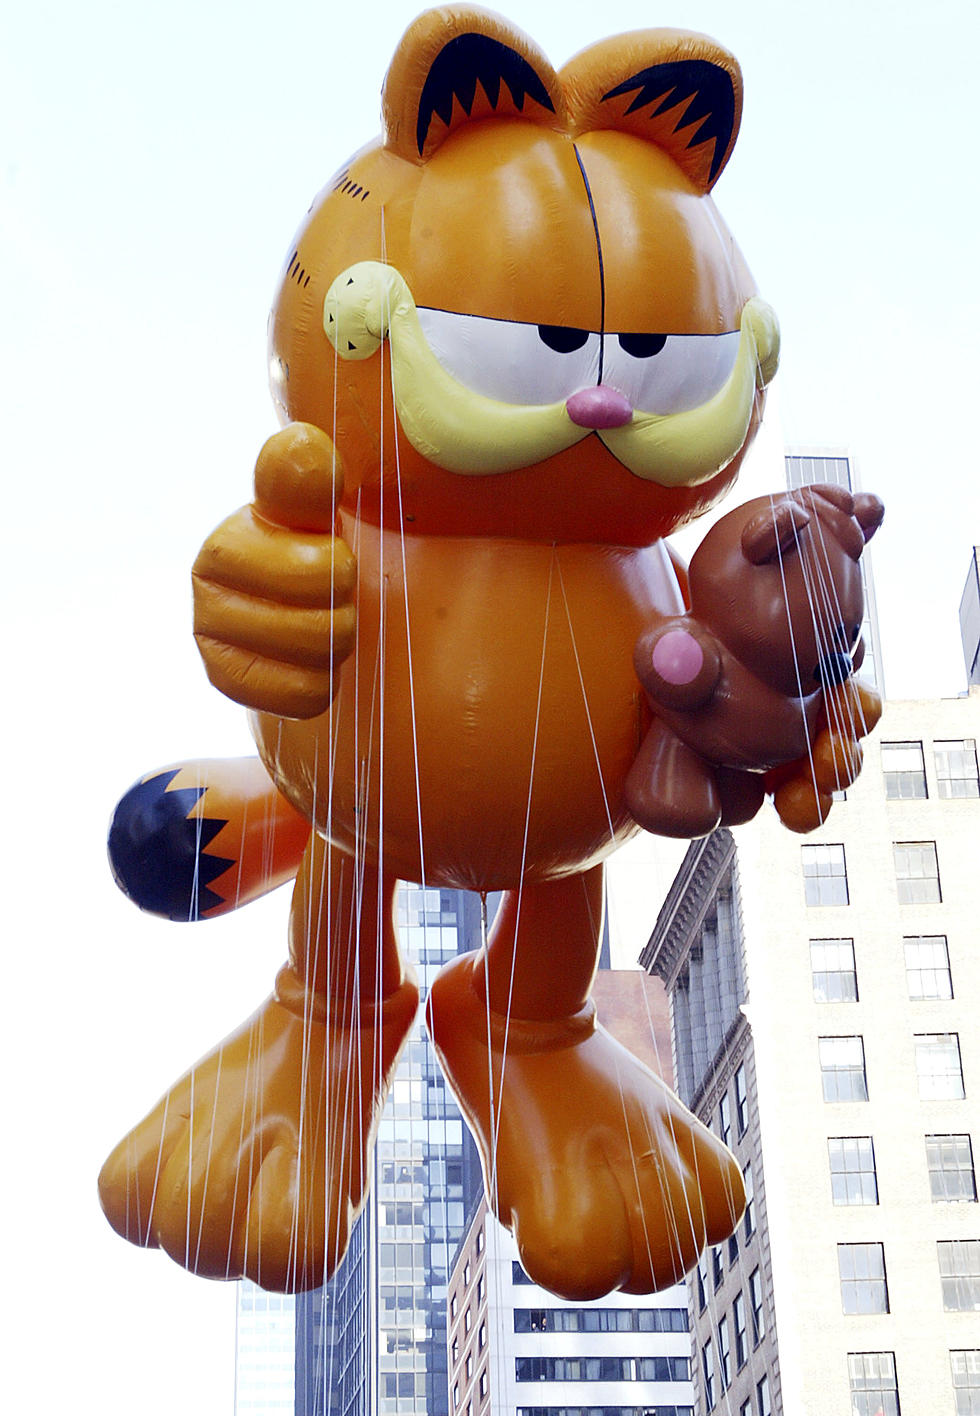 Throwback Thursday: The Macy’s Thanksgiving Day Parade  [VIDEO]